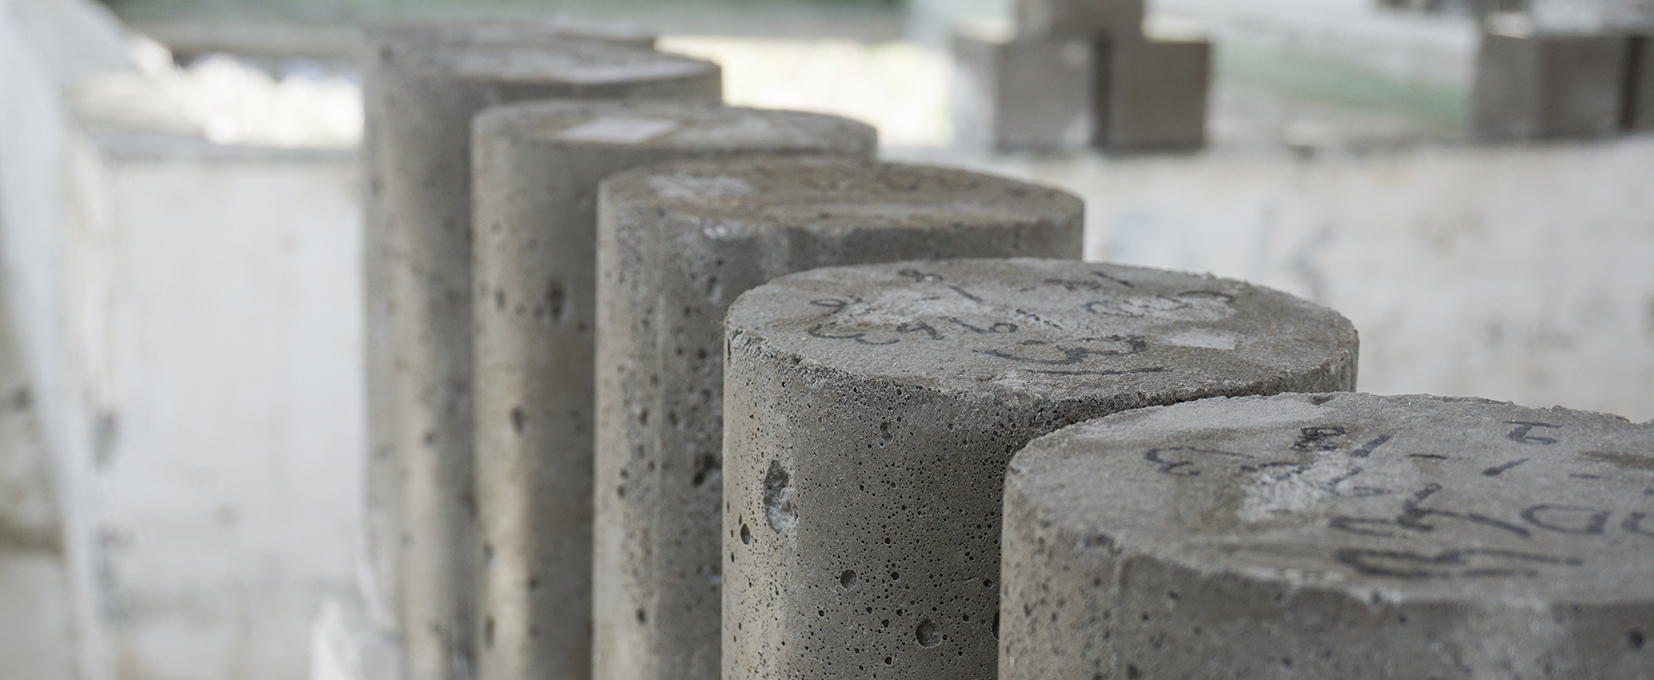 Taking Control of Your Construction Schedule - Achieving Concrete Compressive Strength When You Want It